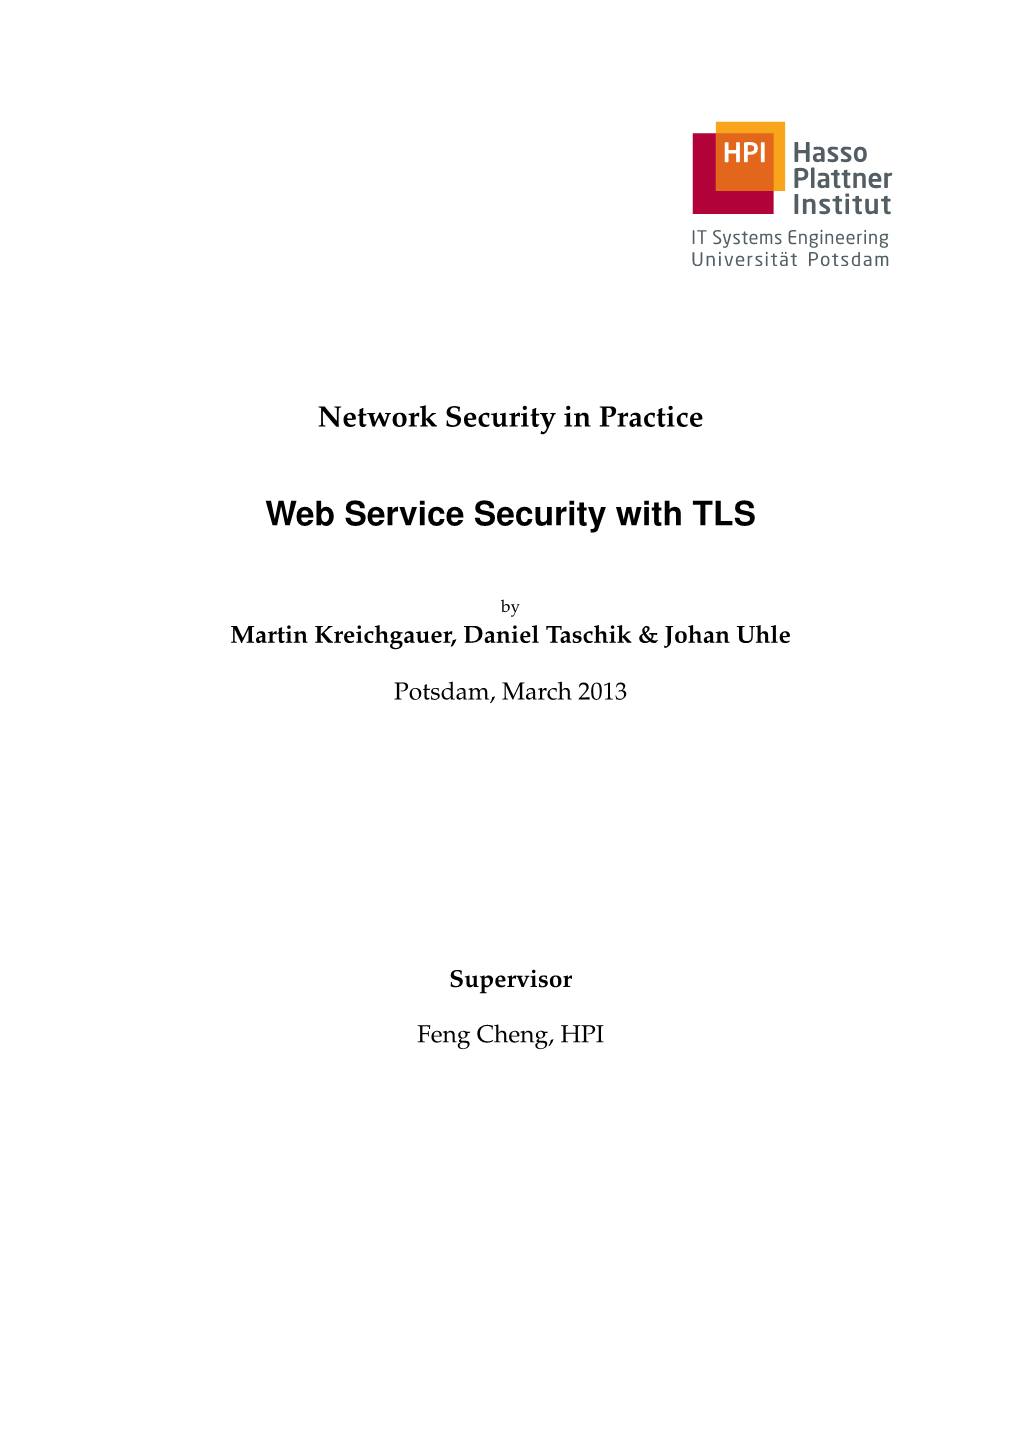 Web Service Security with TLS